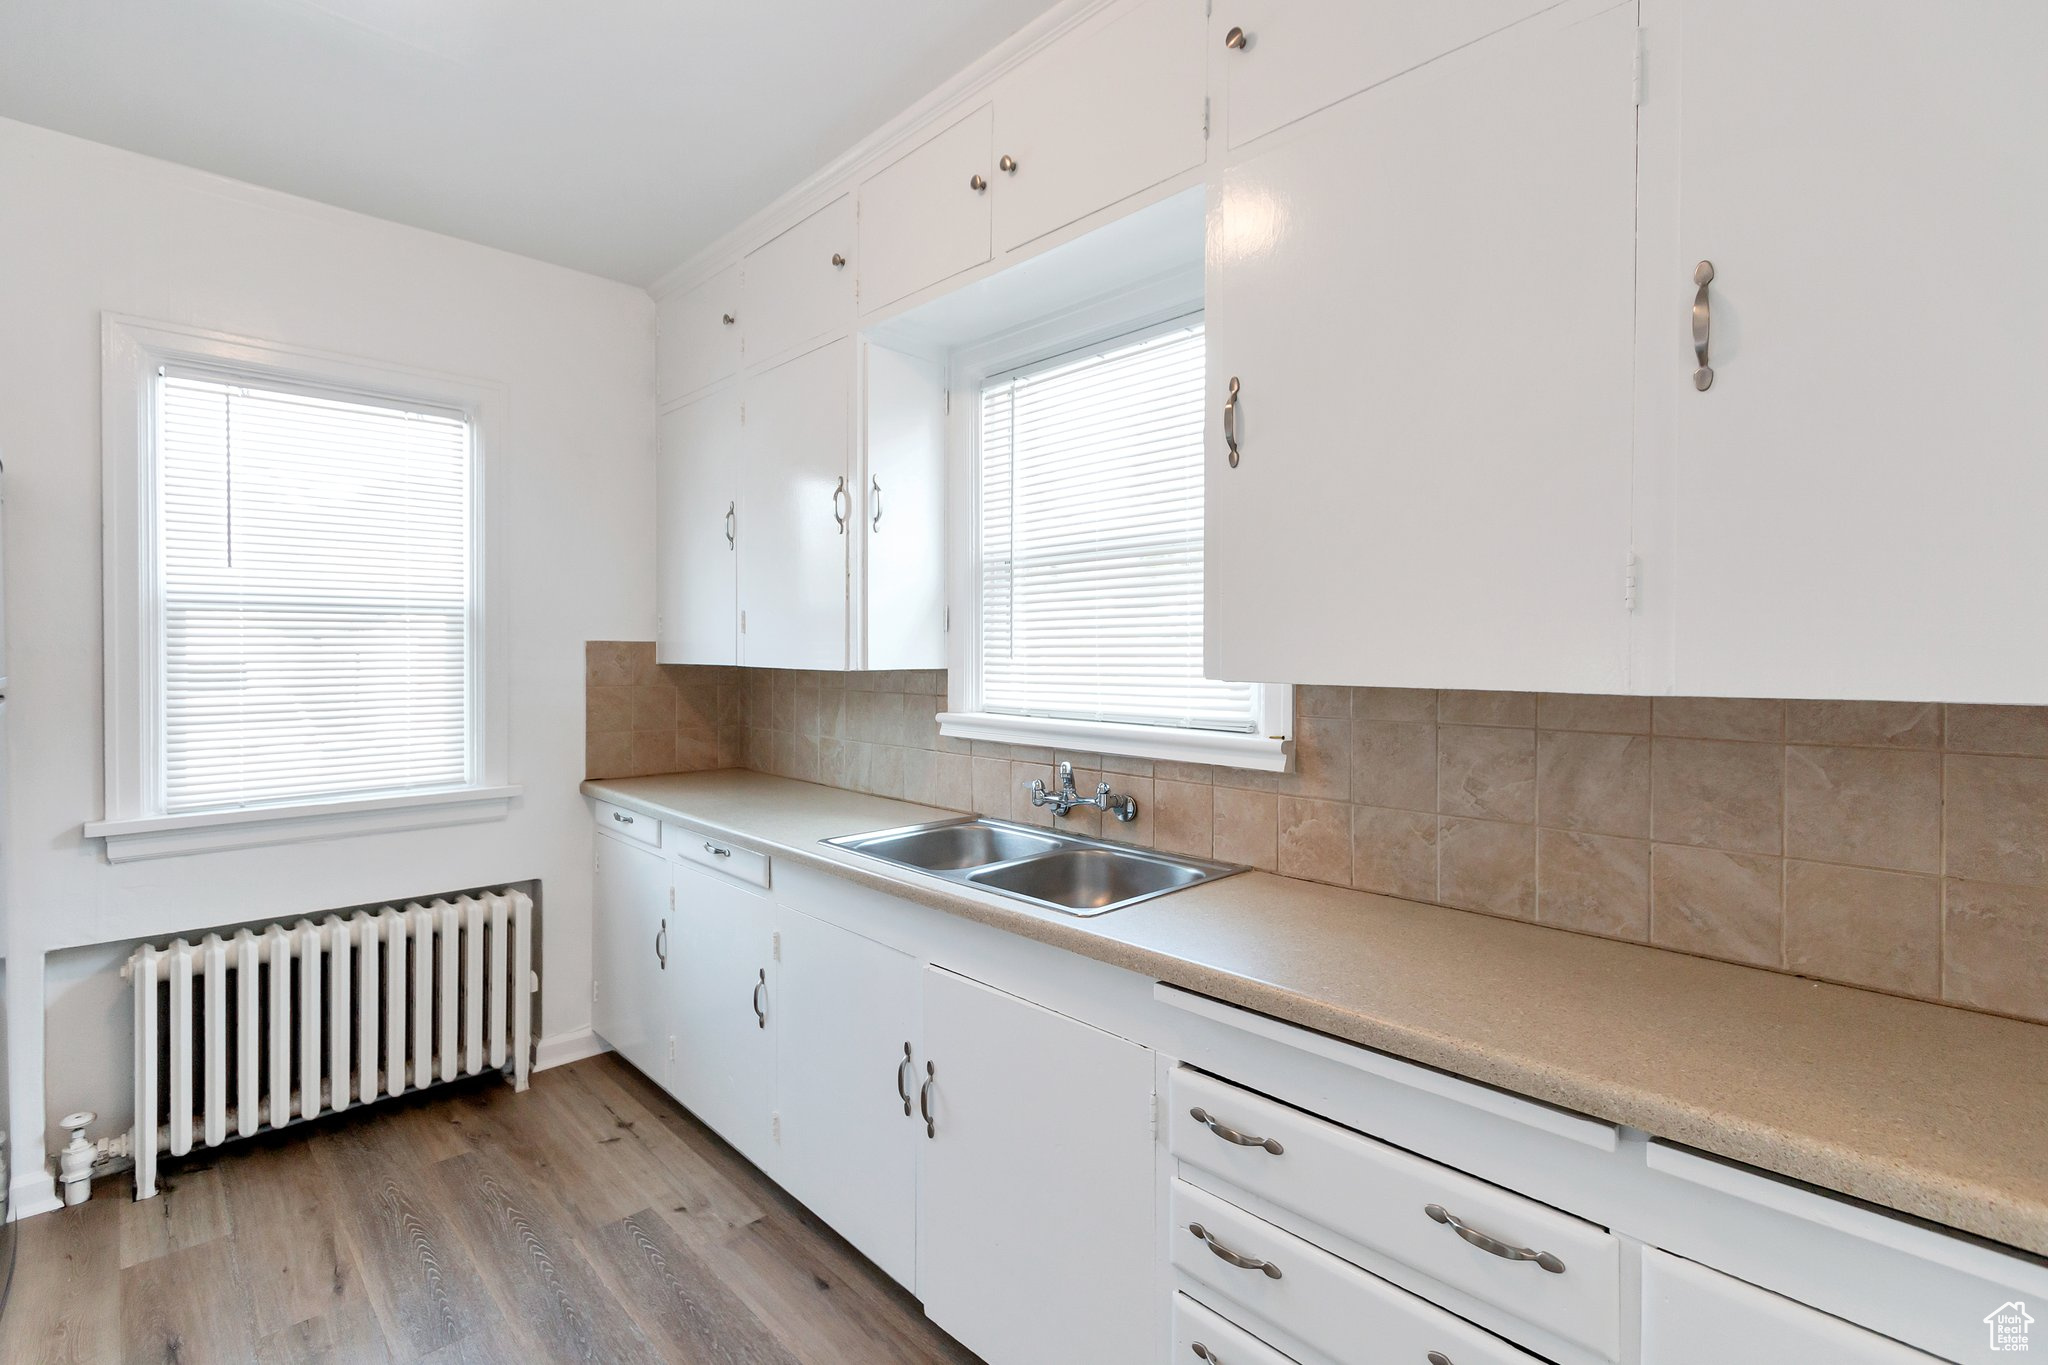 Kitchen with a wealth of natural light, sink, light hardwood / wood-style floors, and radiator heating unit